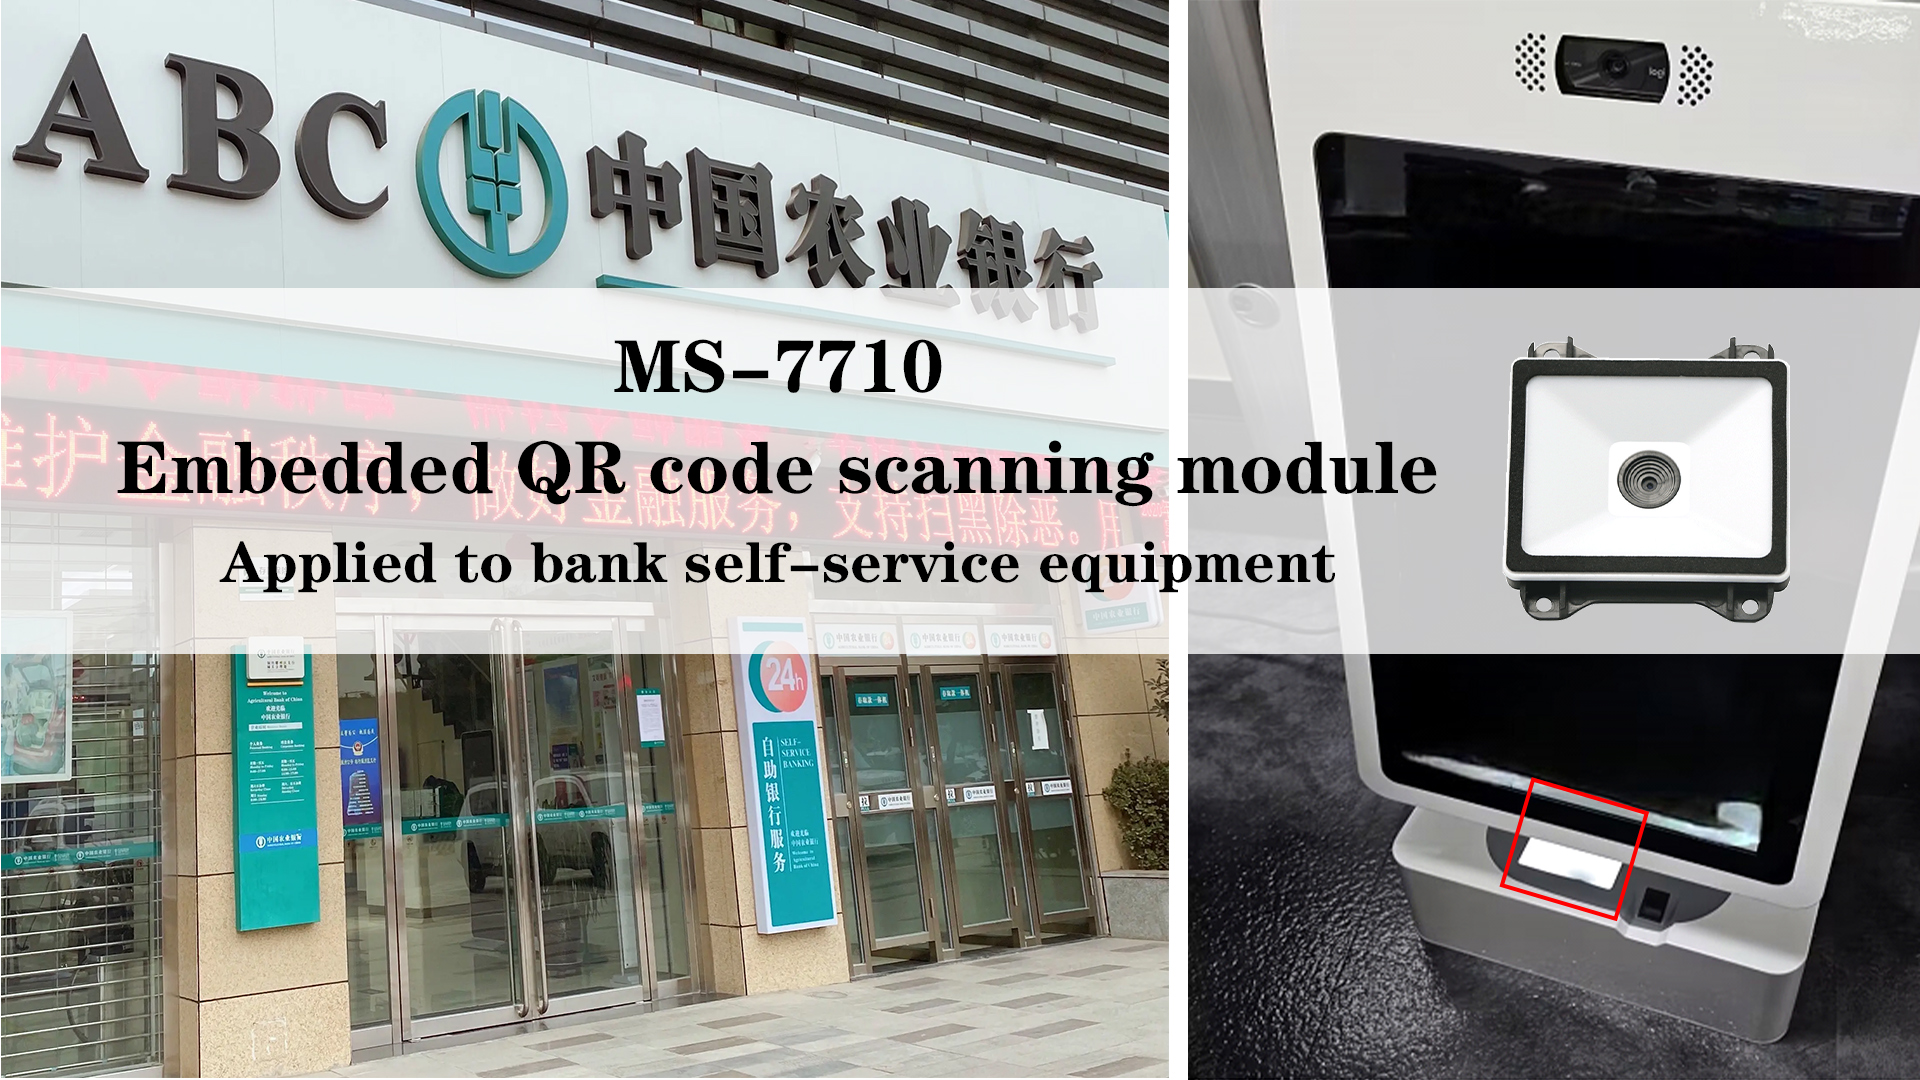 Masung  embedded QR code scanning module MS-7710 is used in bank self-service equipment